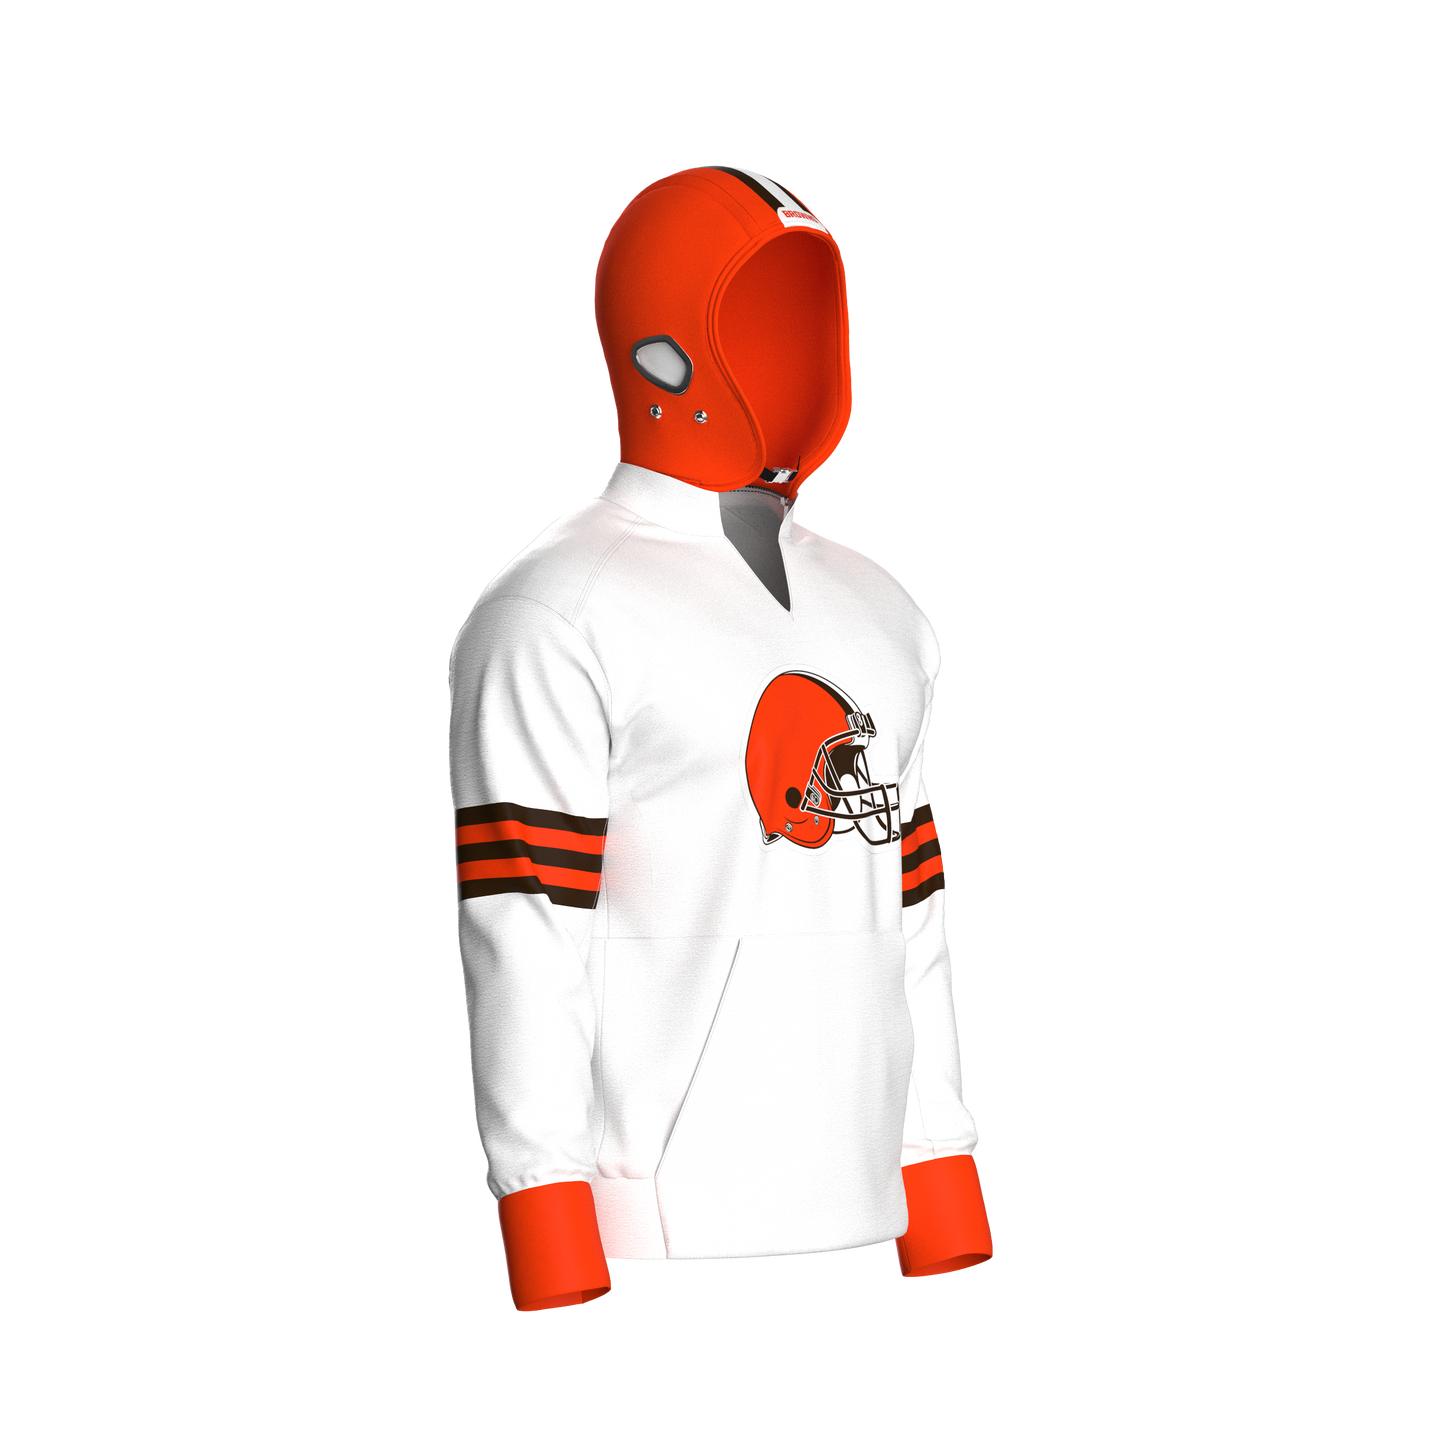 Cleveland Browns Away Pullover (adult)